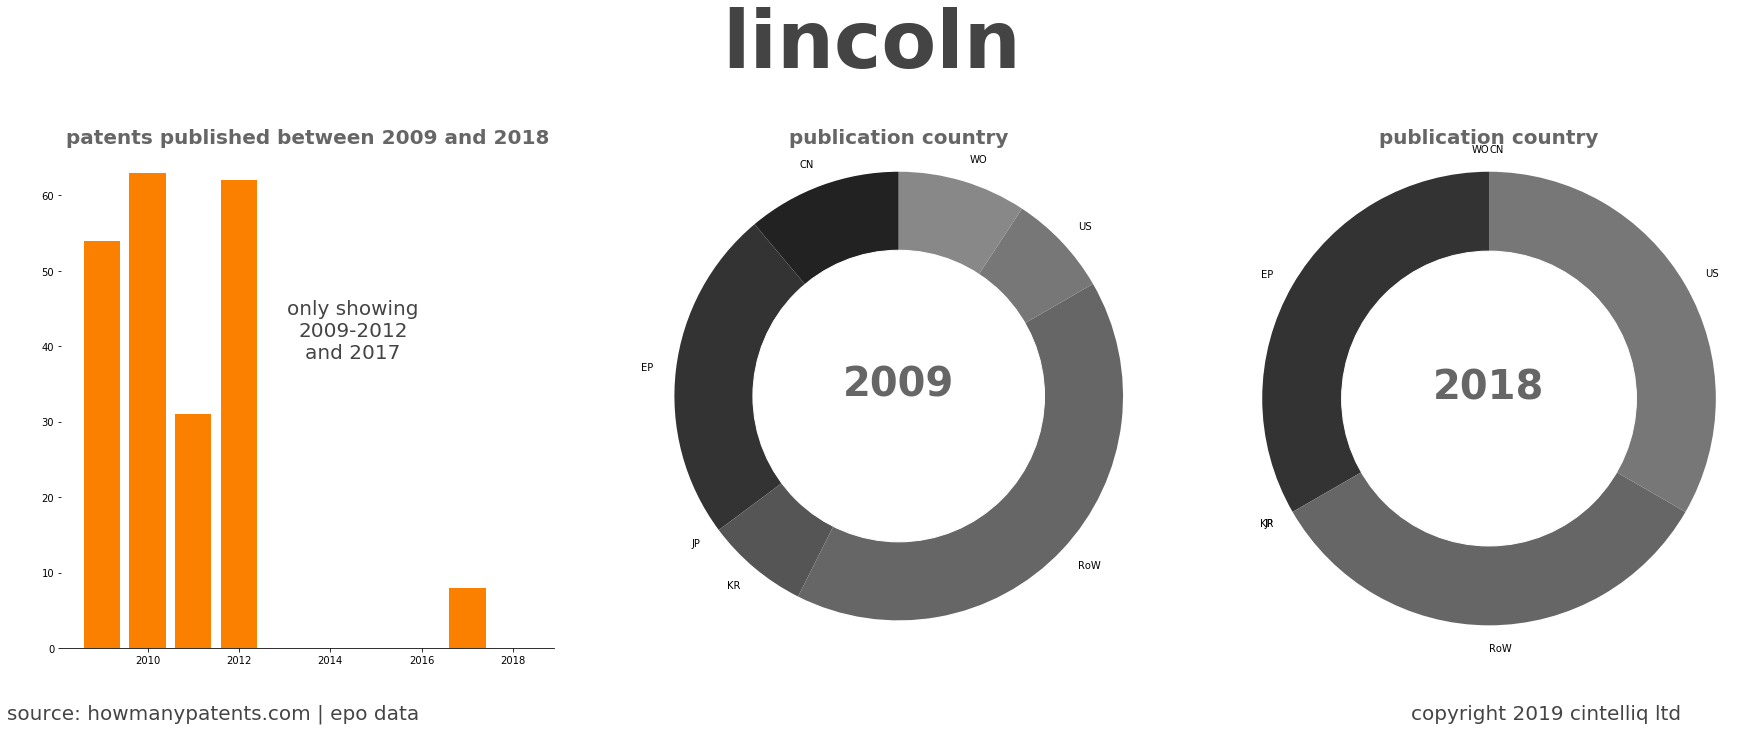 summary of patents for Lincoln